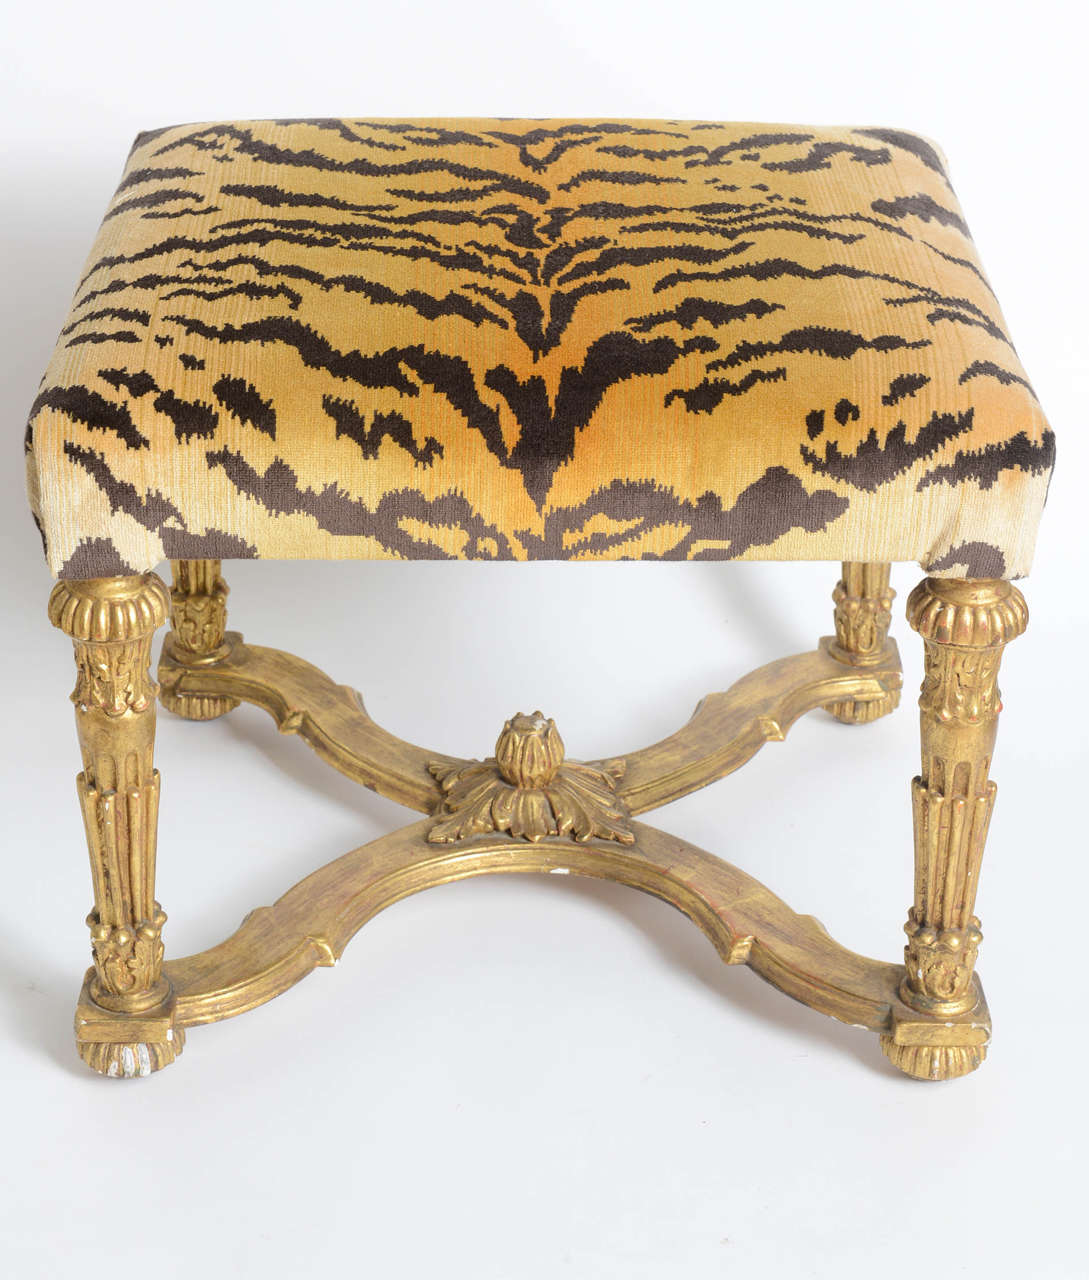 Elegant carved and gilded bench upholstered with Scalamandre tiger fabric.